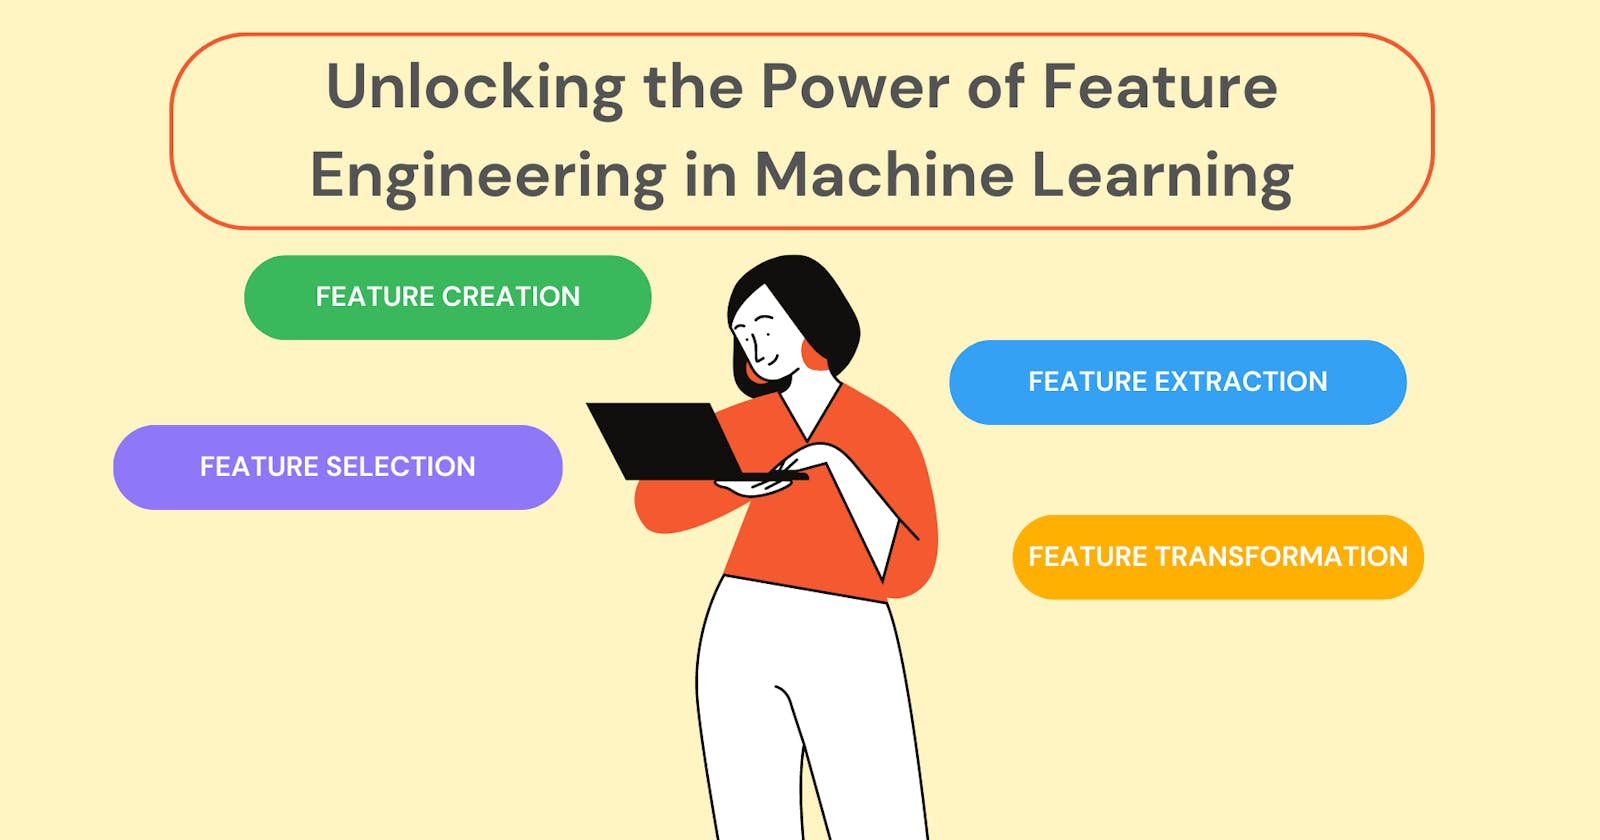 Unlocking the power of Feature Engineering in Machine Learning